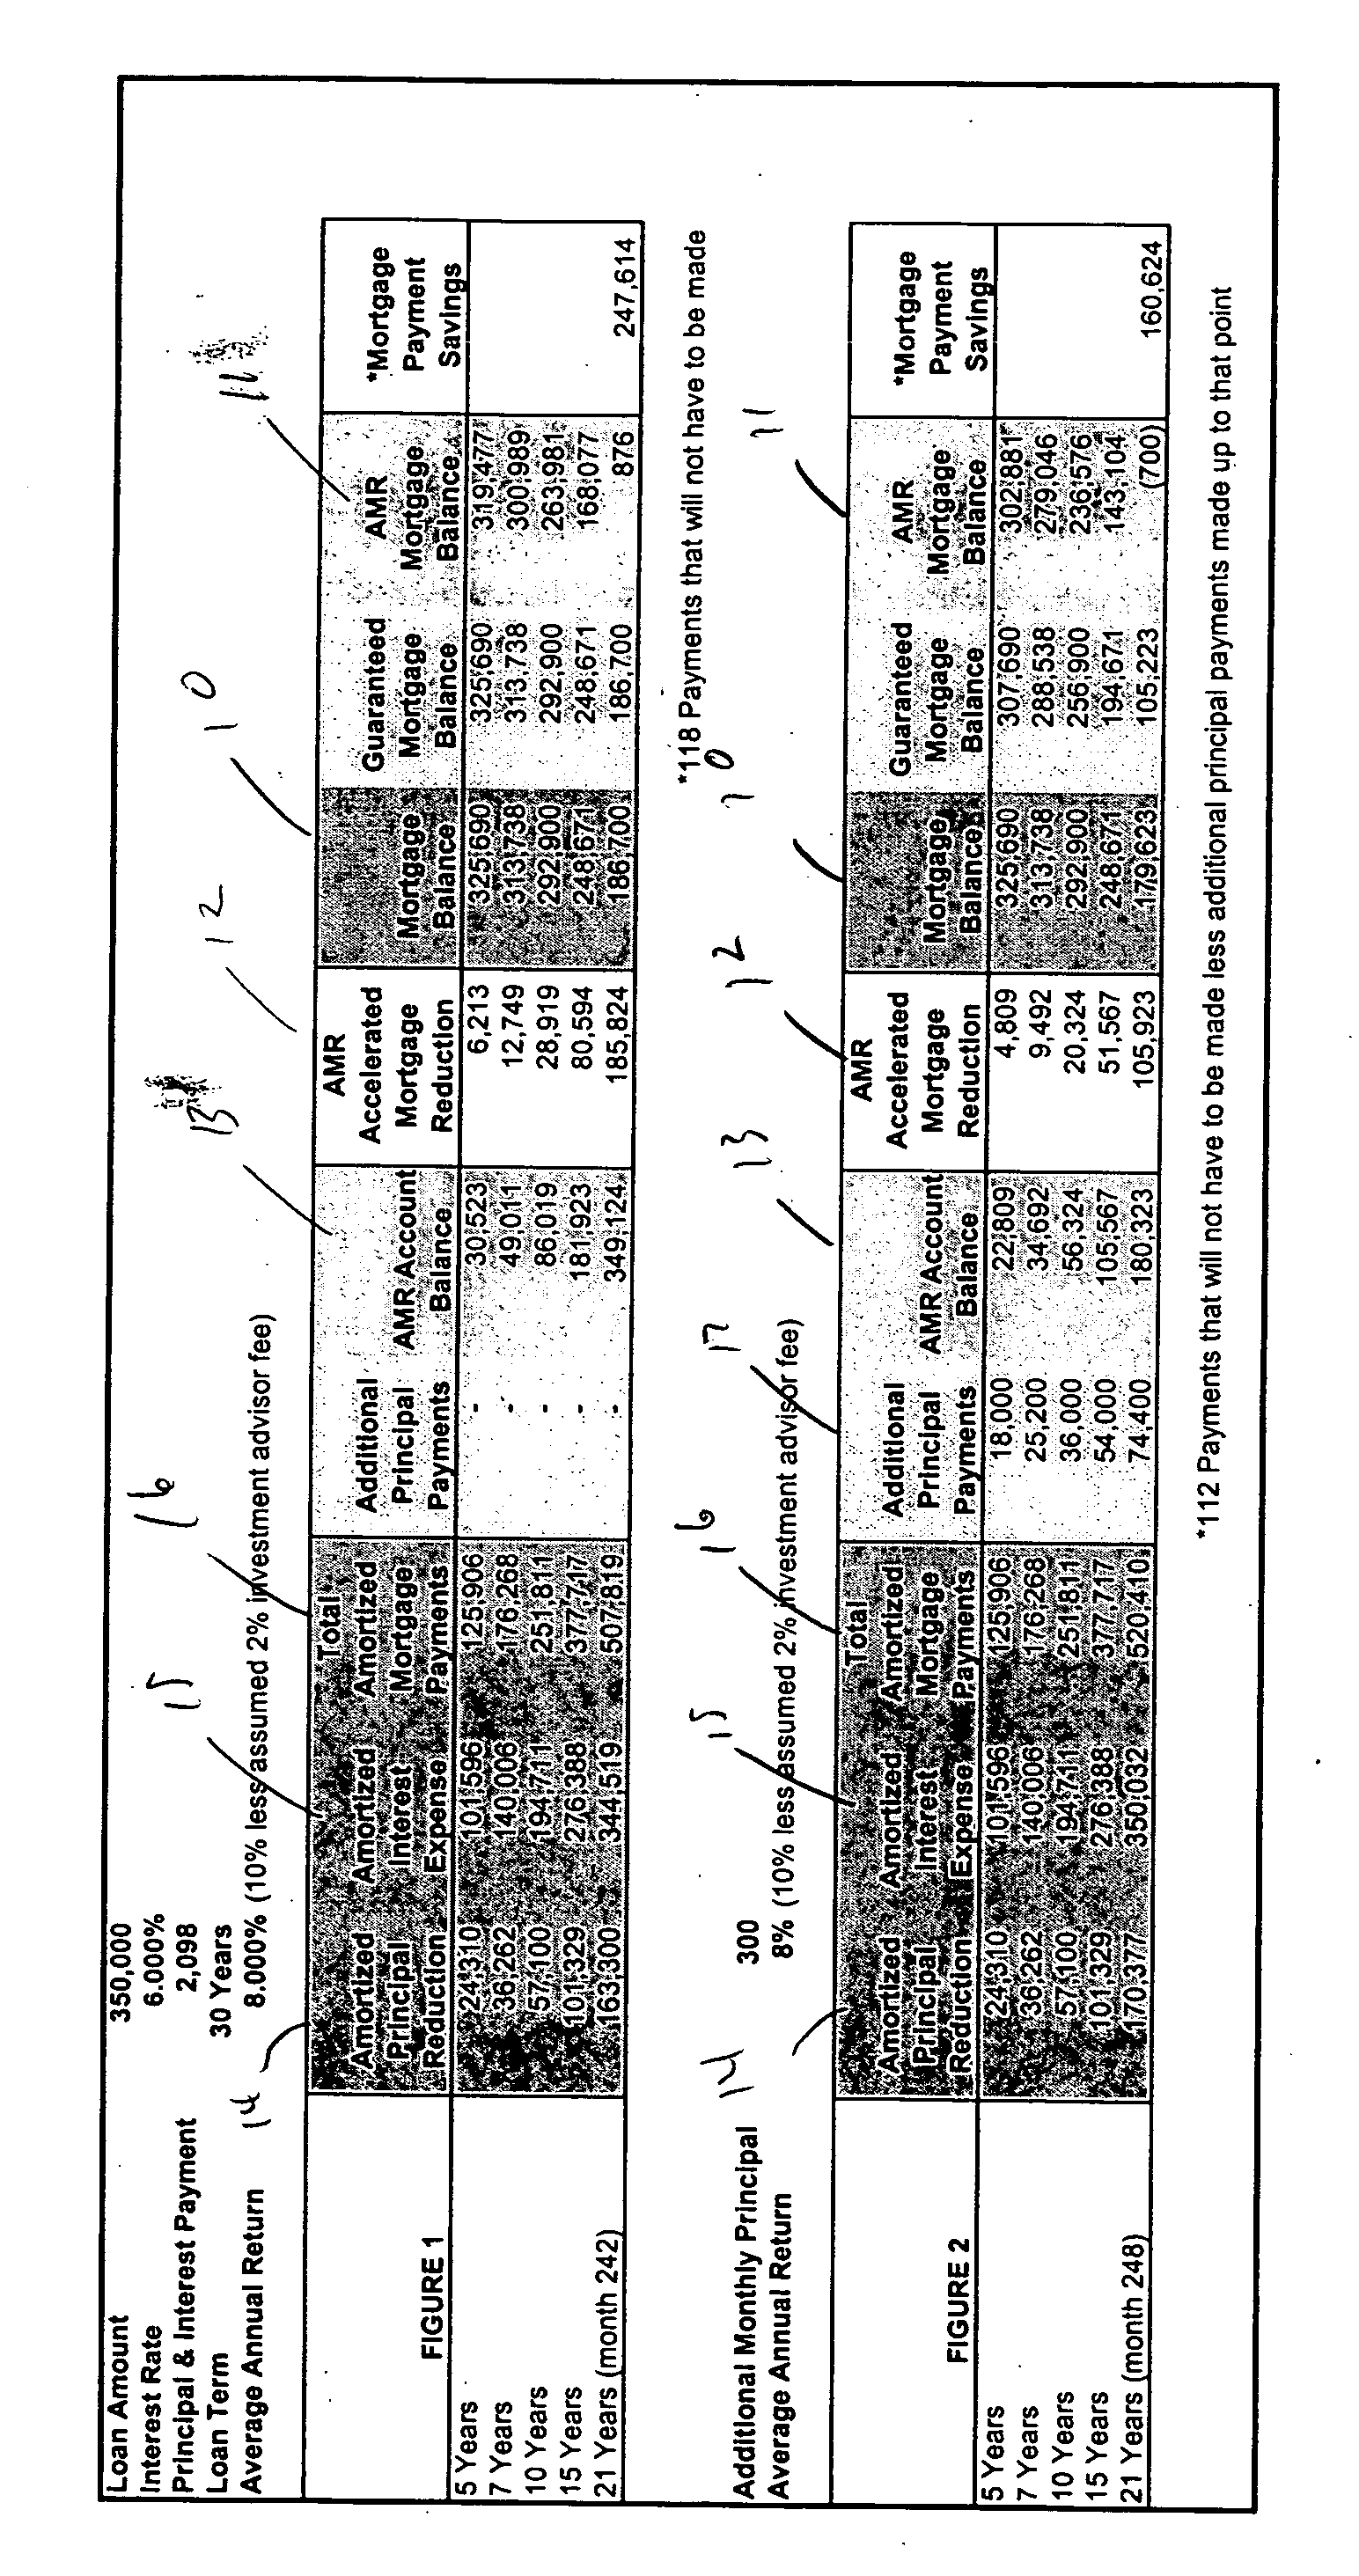 Methods for accelerated principal reduction